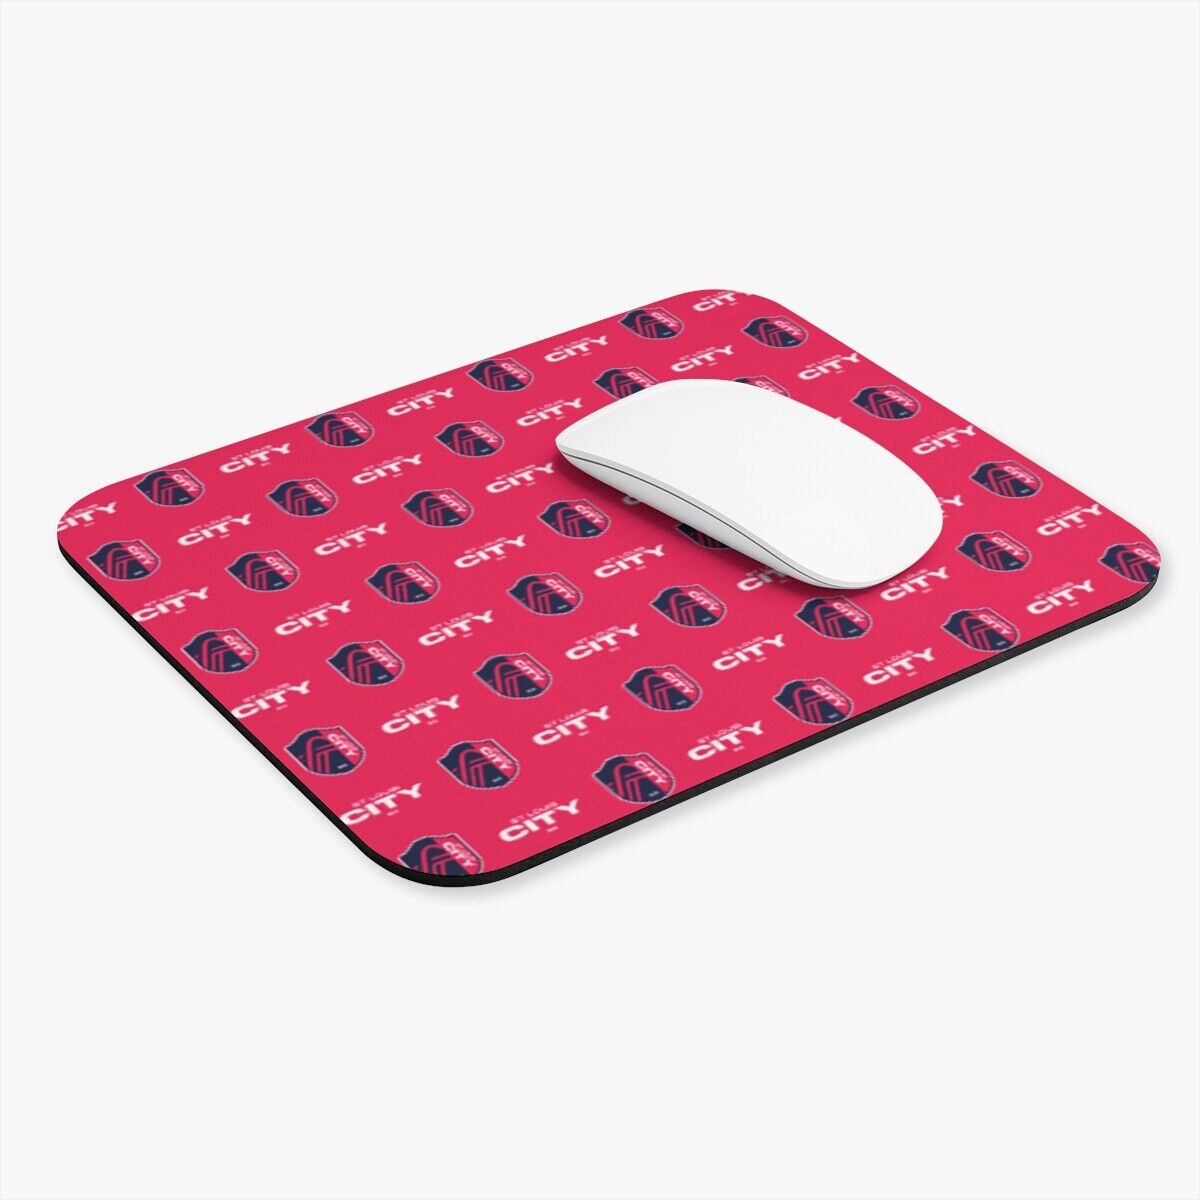 St. Louis City Soccer Club Mouse Pad (High-Quallity)